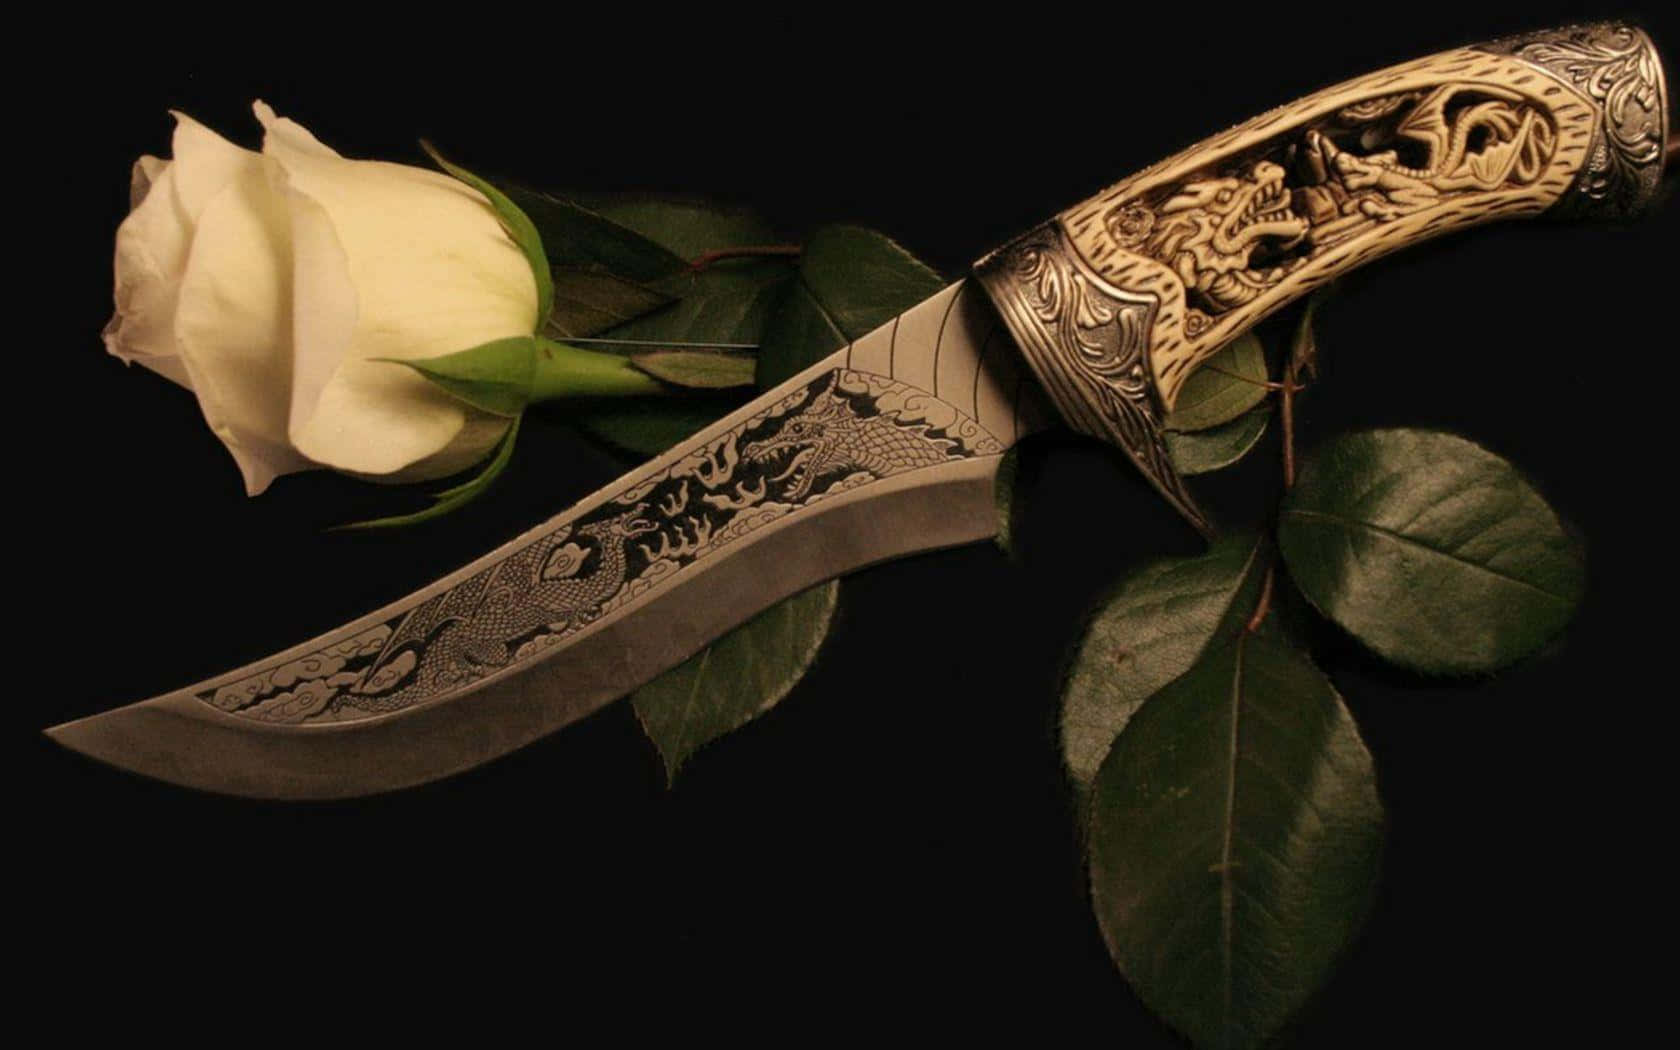 A Knife With A Rose And A Black Background